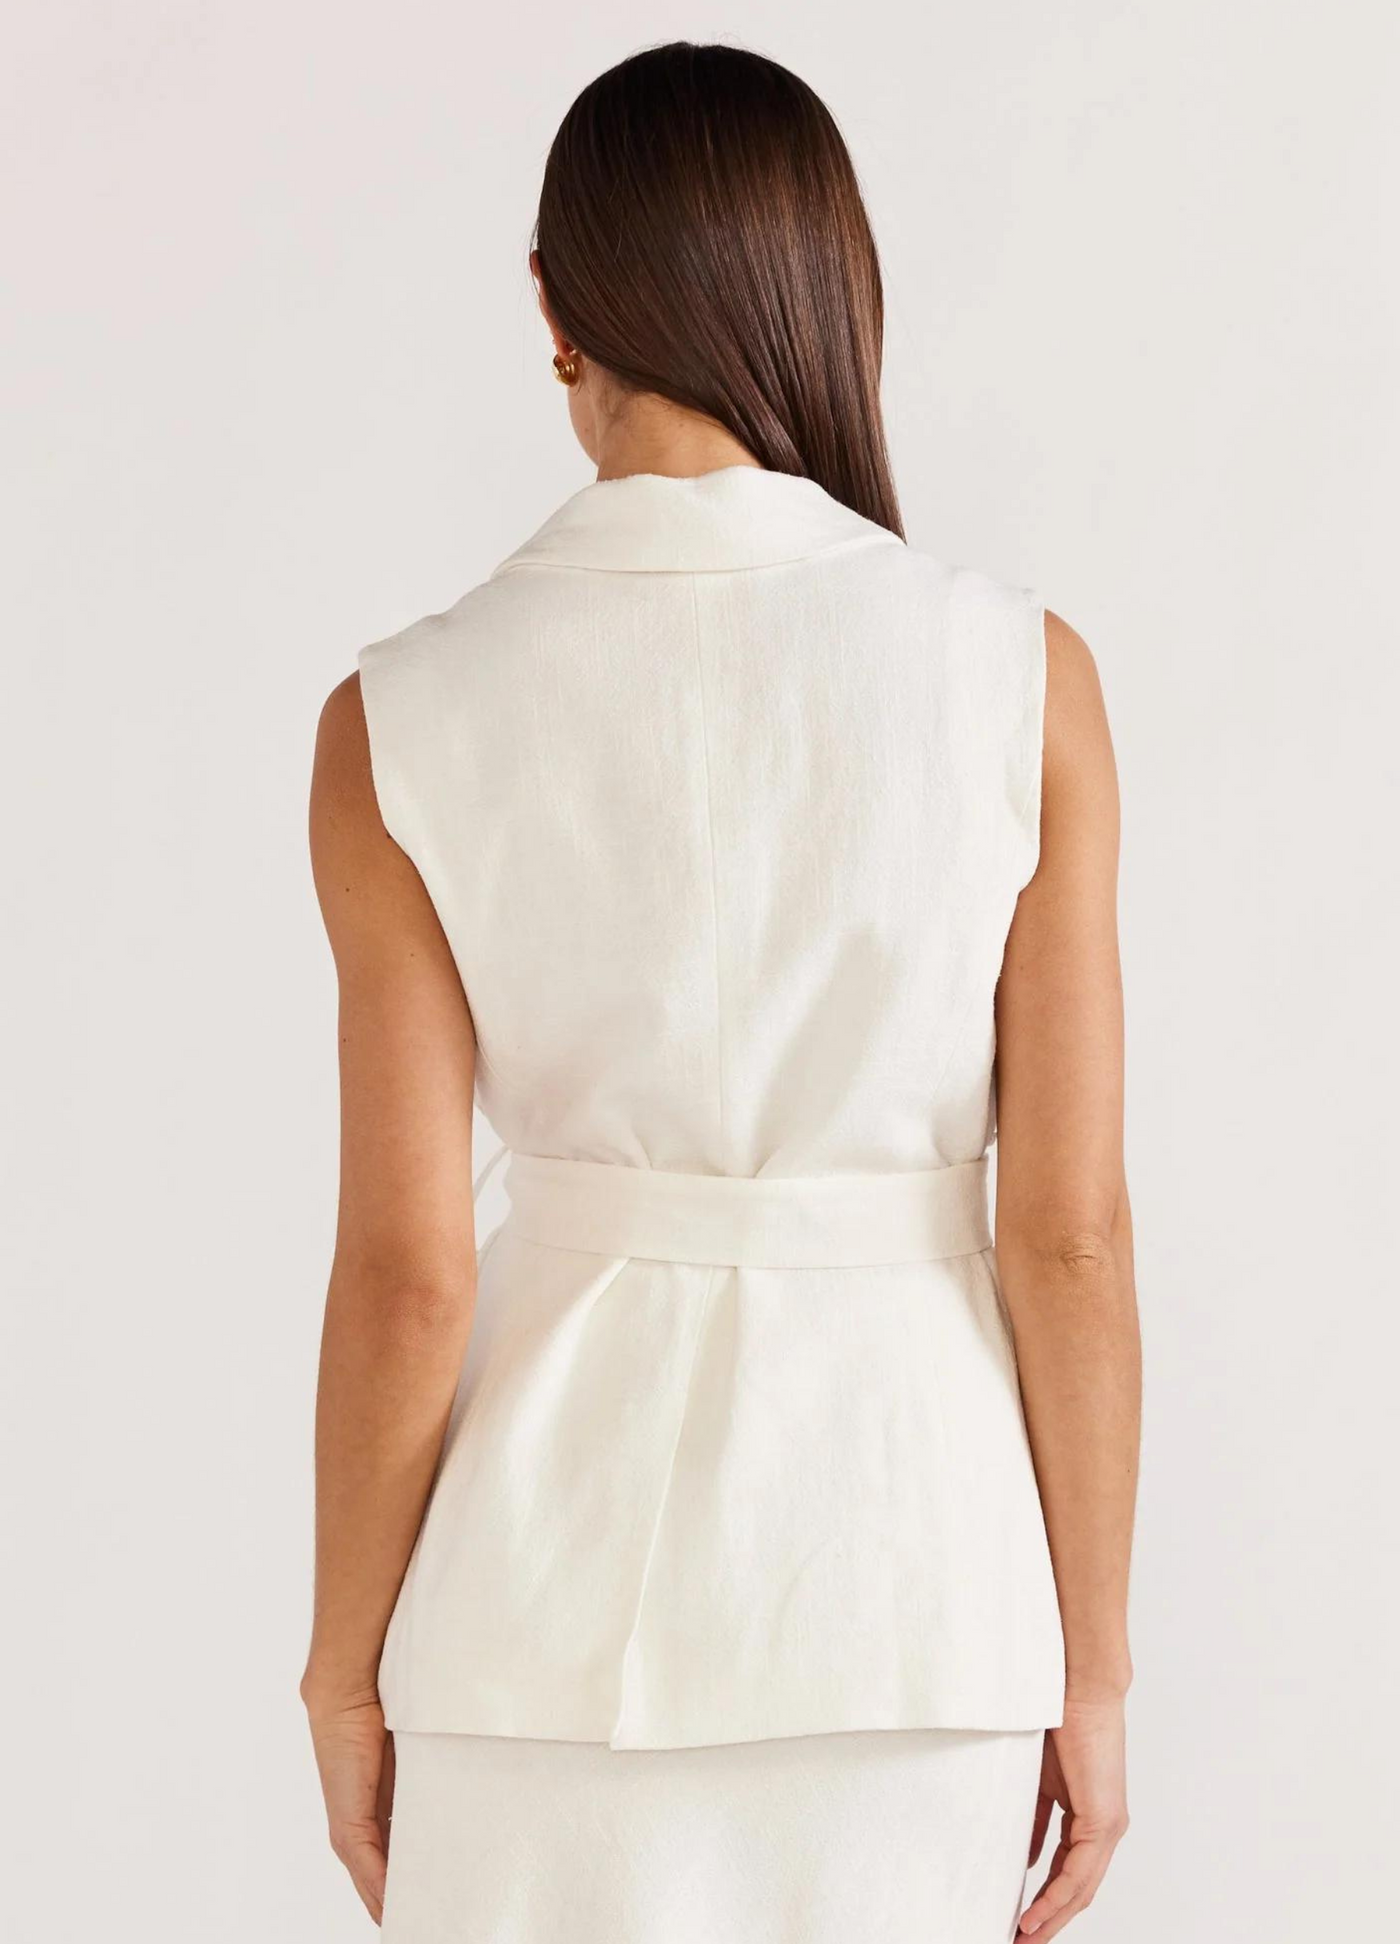 Sleeveless button up white blazer from Staple the Label